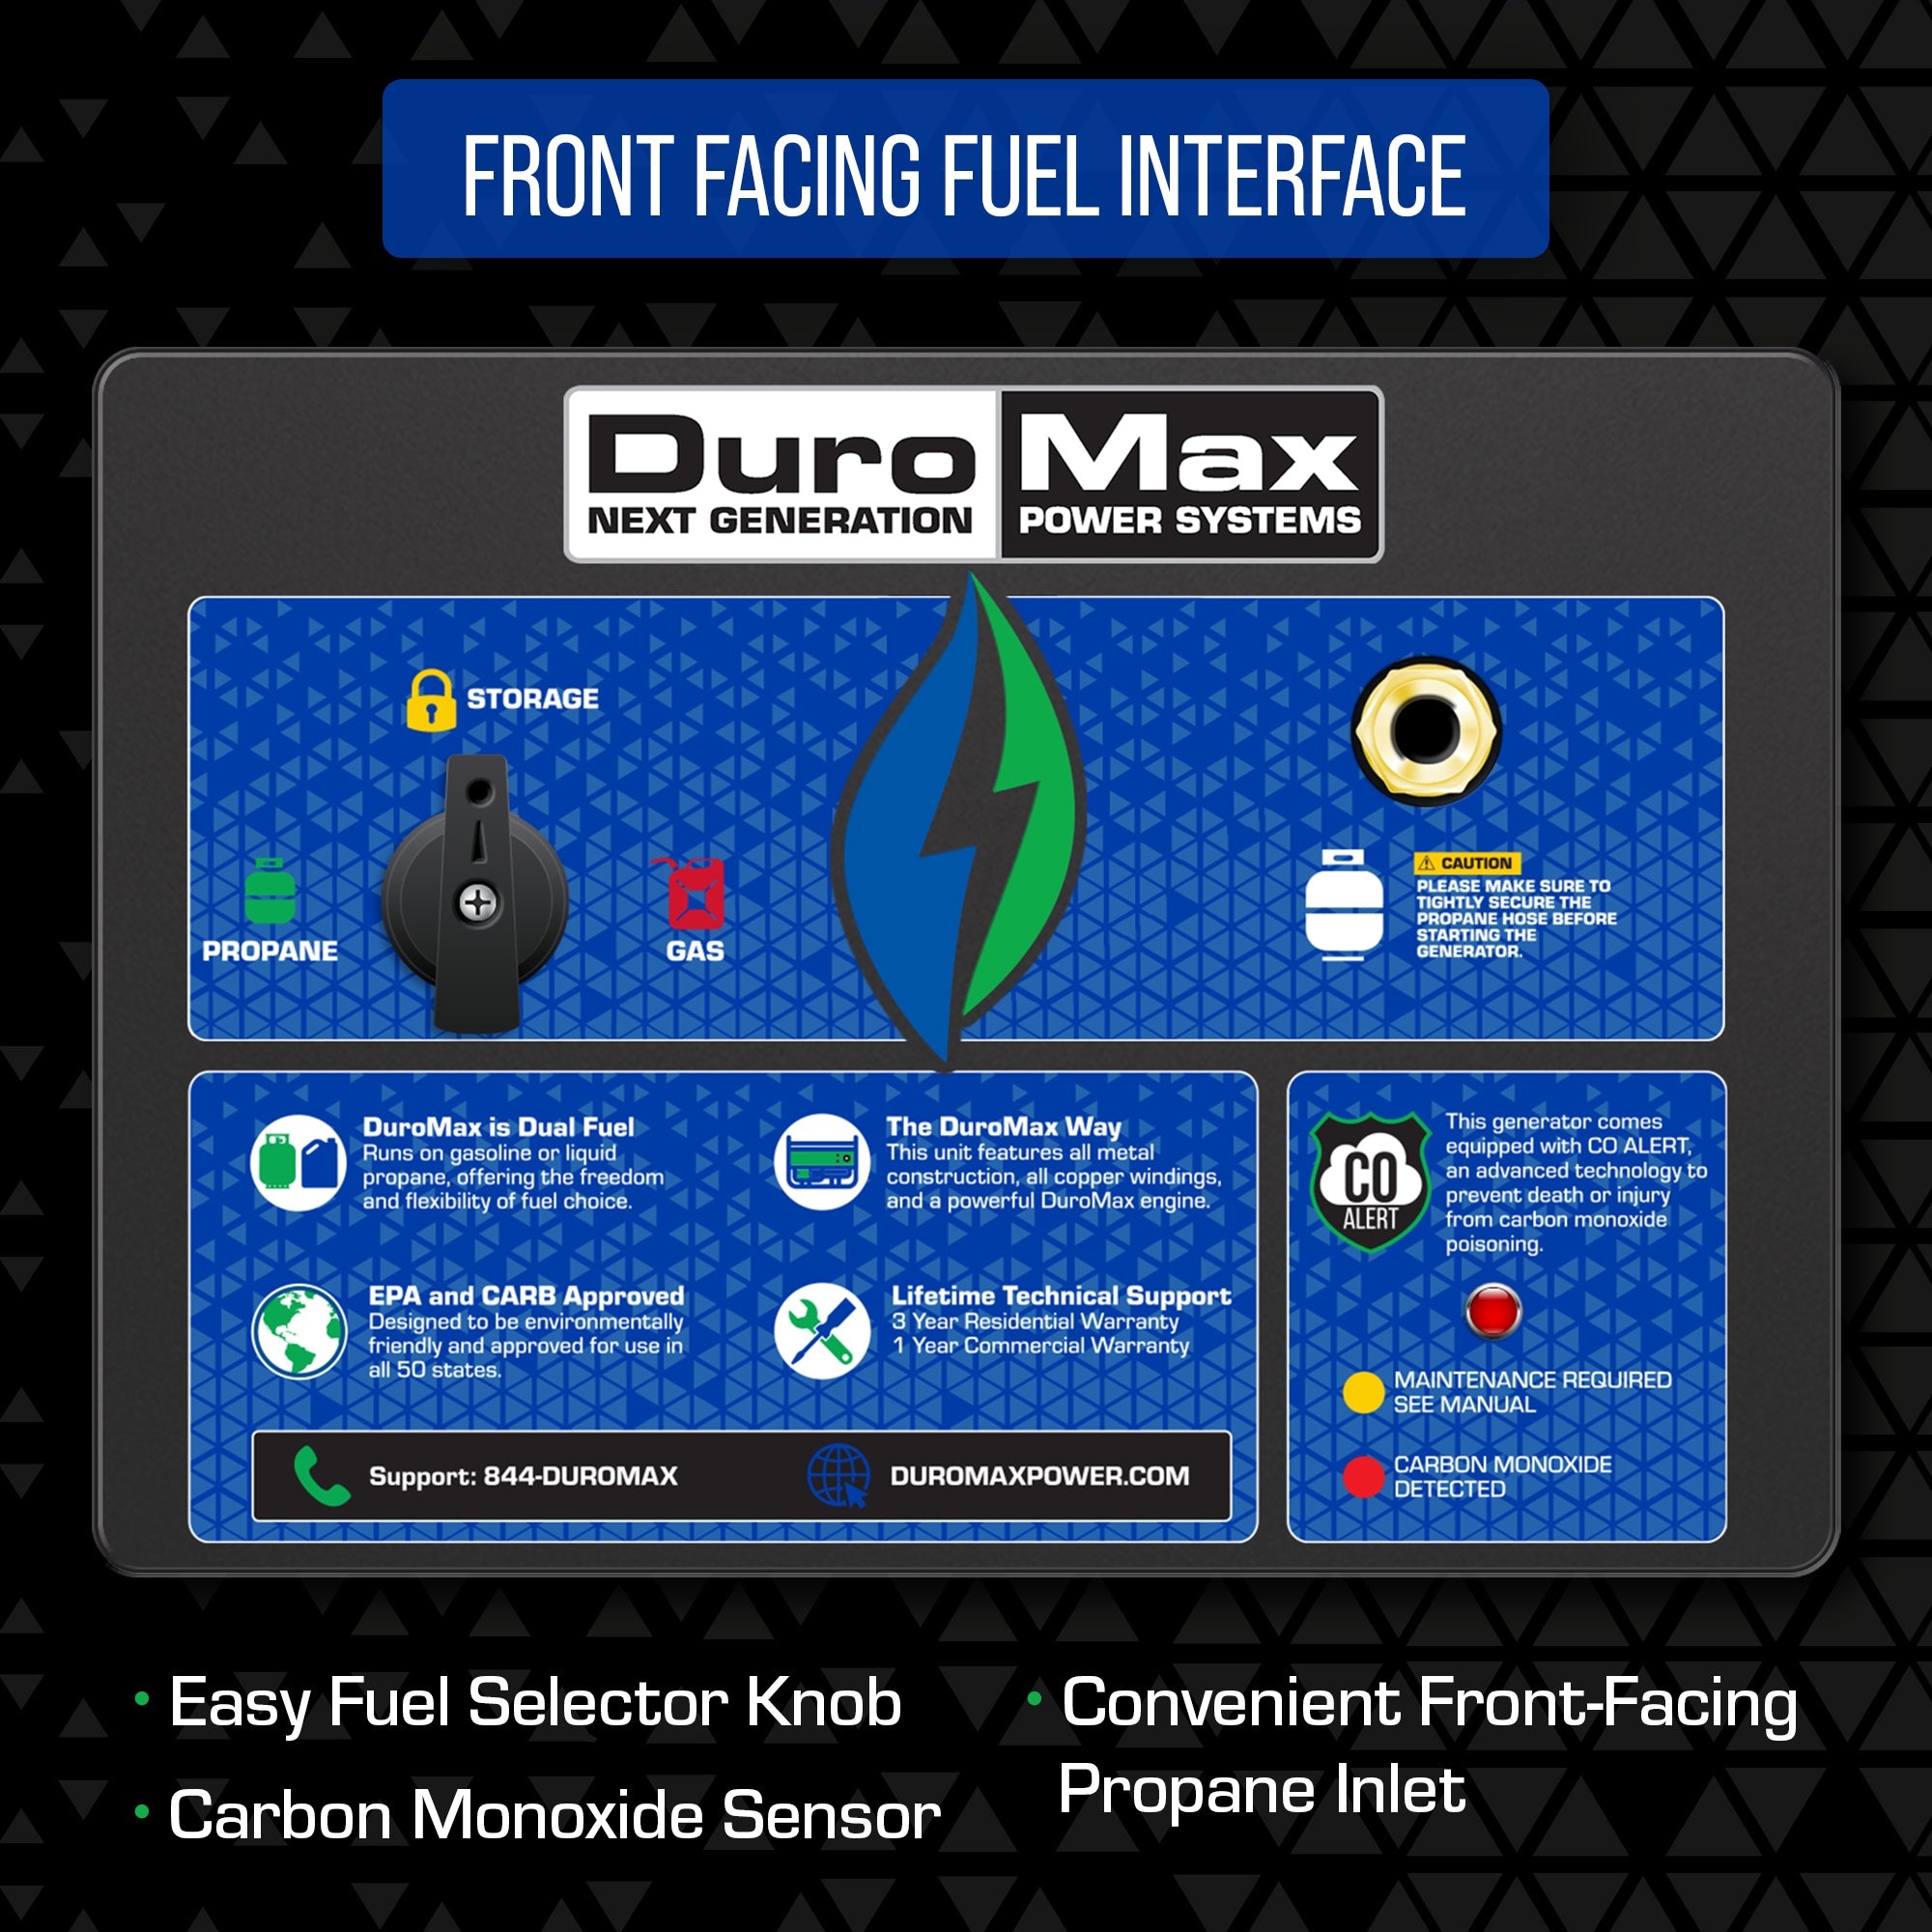 DuroMax XP12000HX 9500W/12000W Dual Fuel - Front Facing Fuel Interface